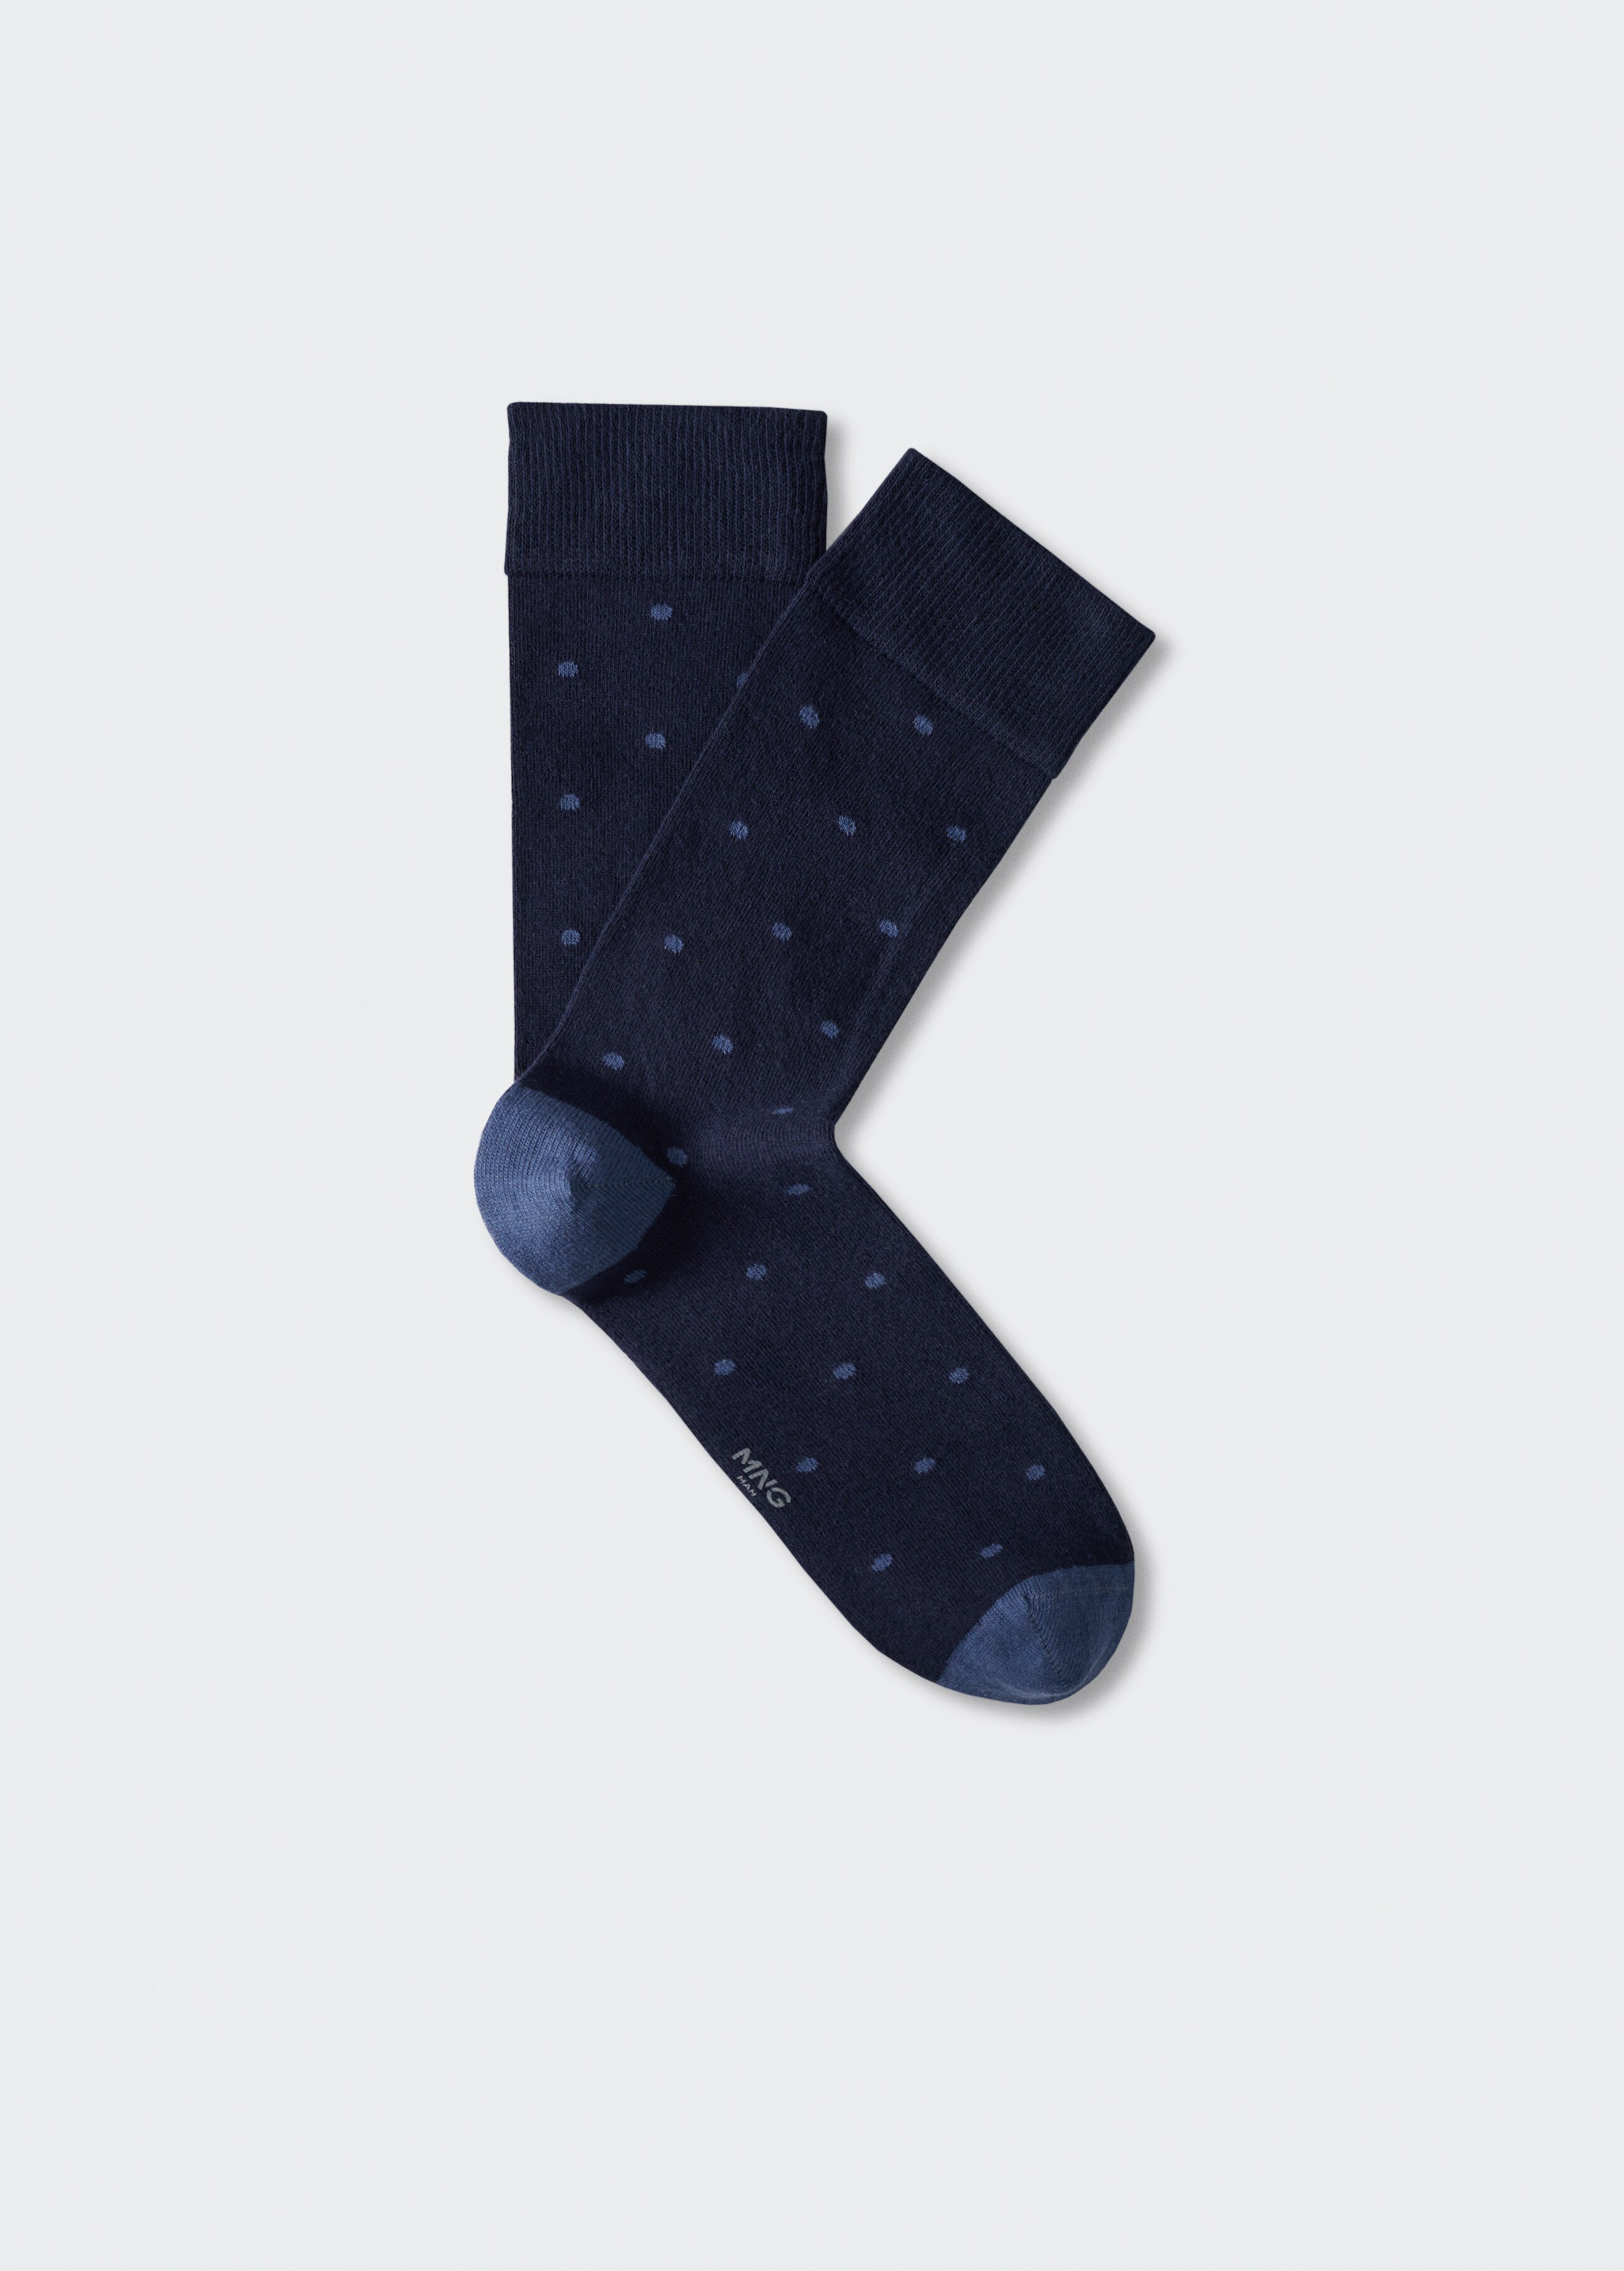 Polka dot cotton socks - Article without model